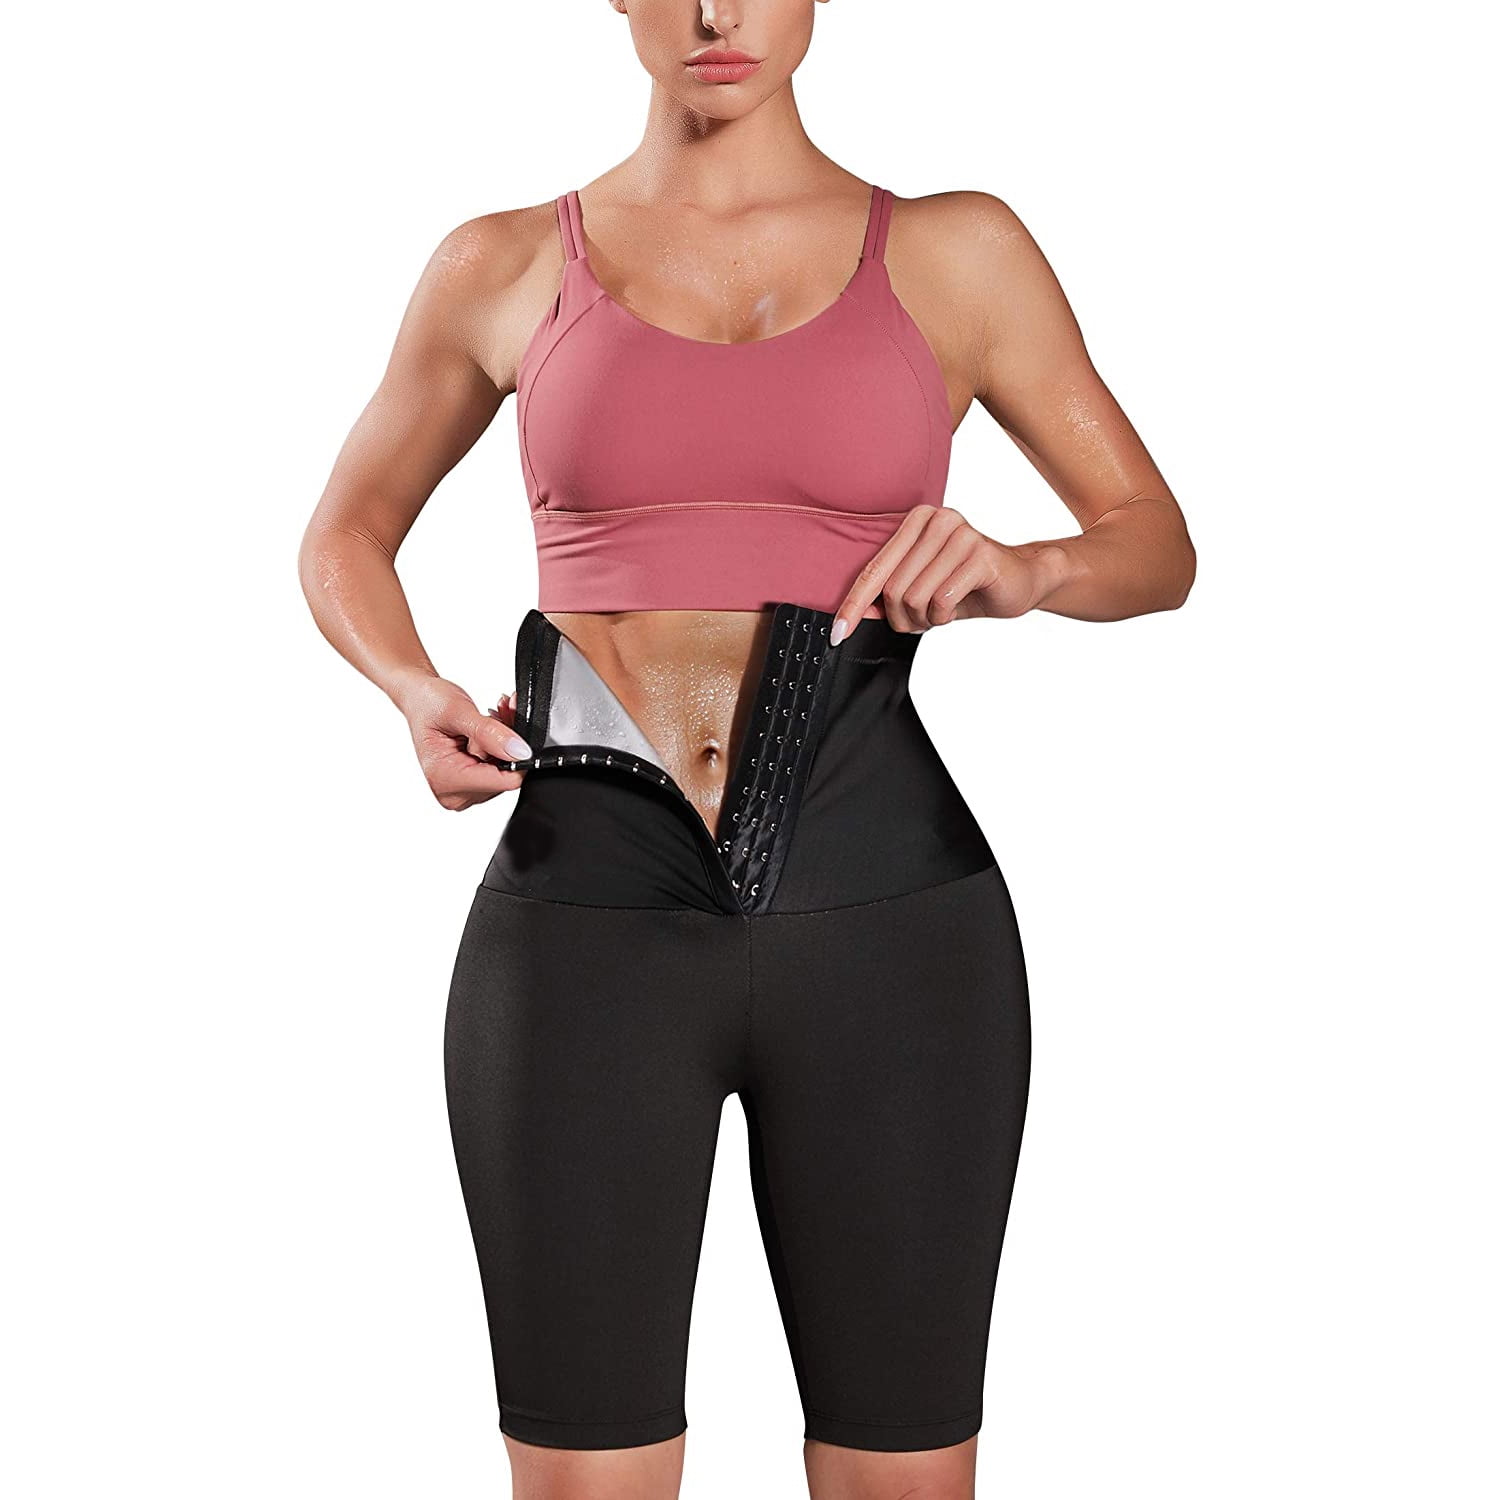 Women Slimming Pants Leggings Sauna Hot Fashion Thermo Body Fitness Shaping Abdominal Slim Fit Fitted Workout Shaper Shorts Ladies 